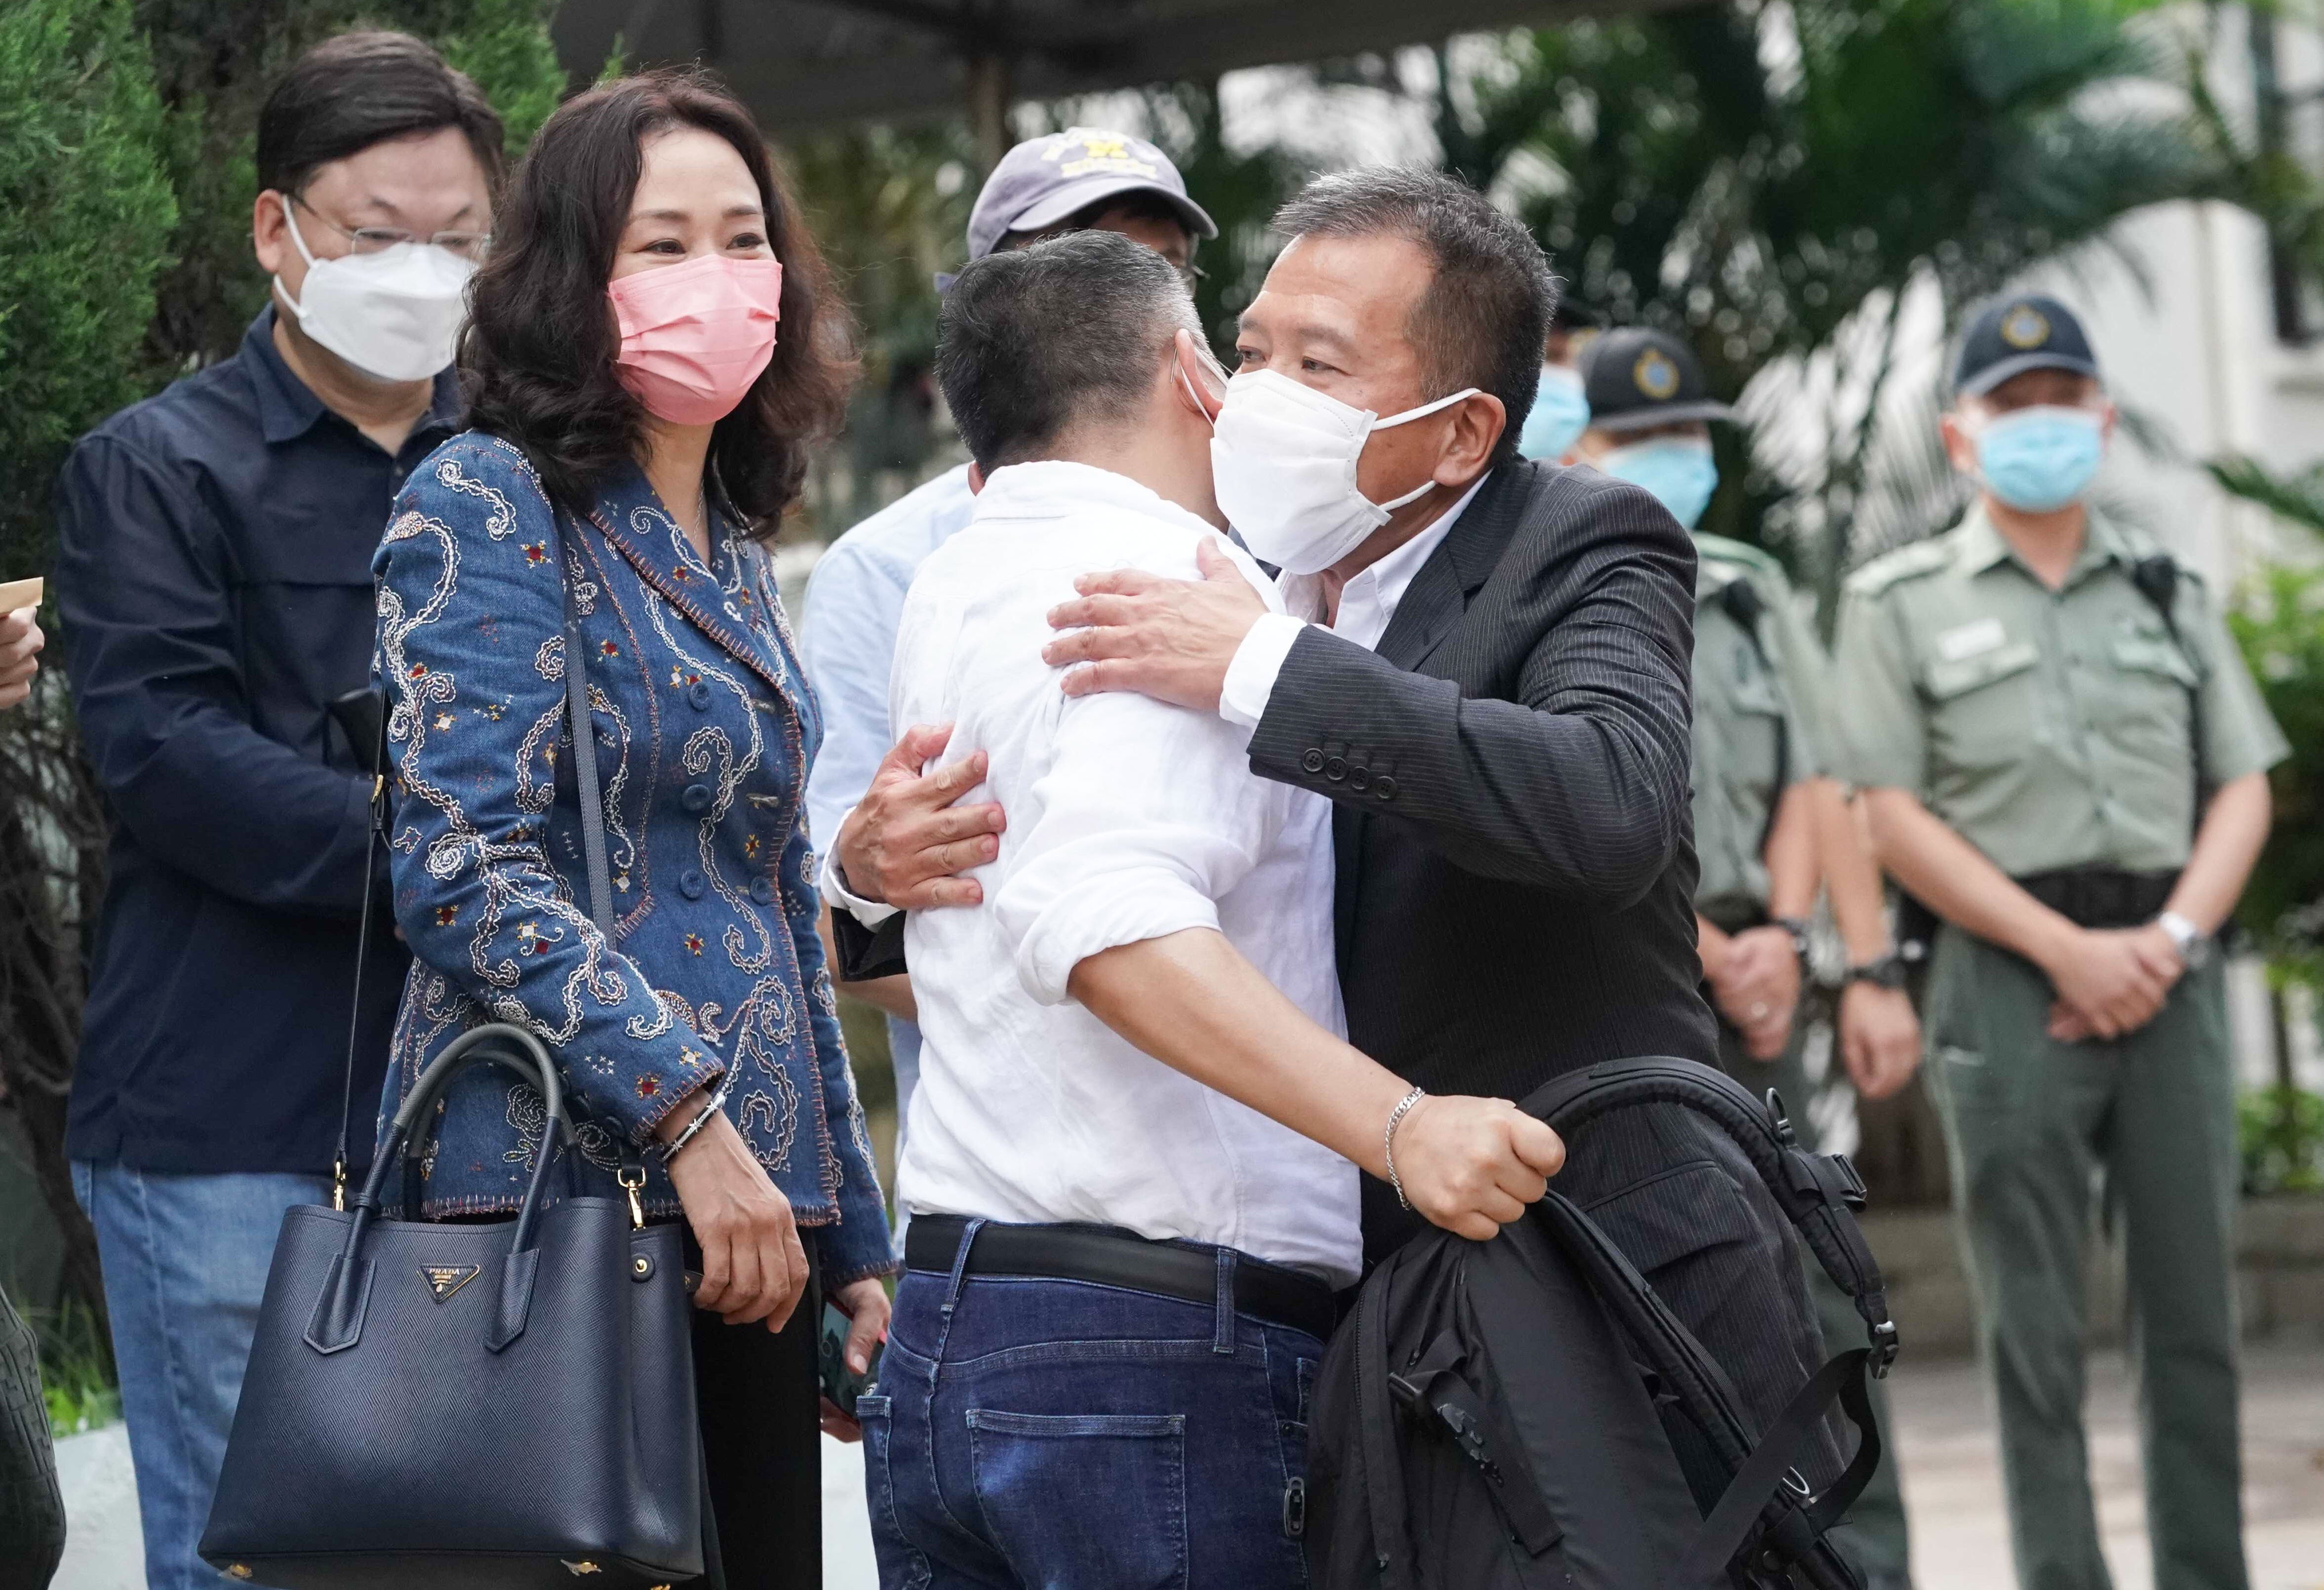 Peter Chan (in black suit) hugs a member of a group of people who had come to receive him after his release. Photo: Felix Wong